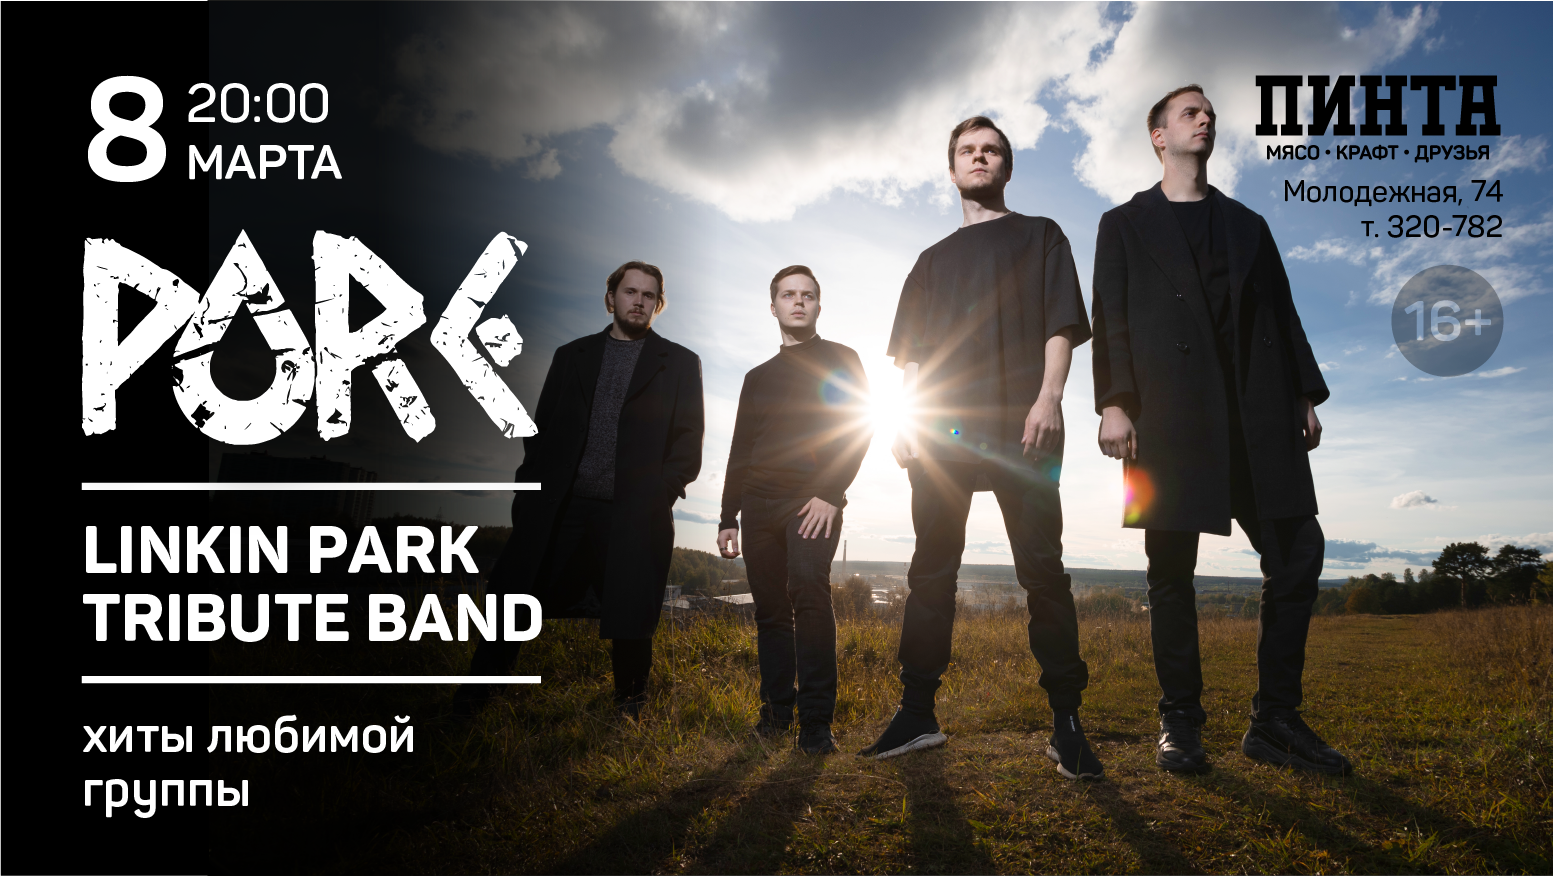 PURE. LINKIN PARK TRIBUTE BAND